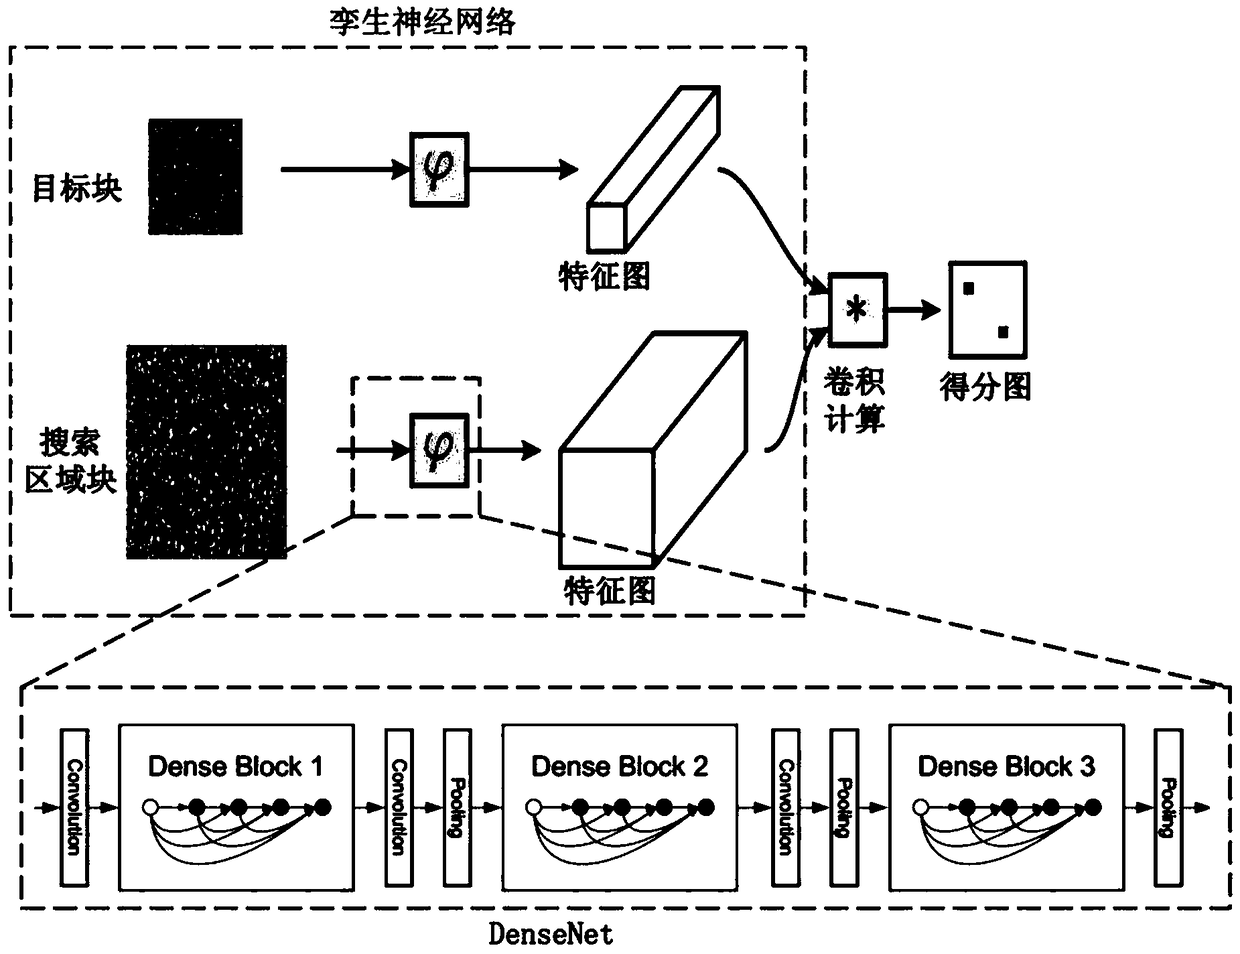 Neural network model training method and system for ultrasonic displacement estimation